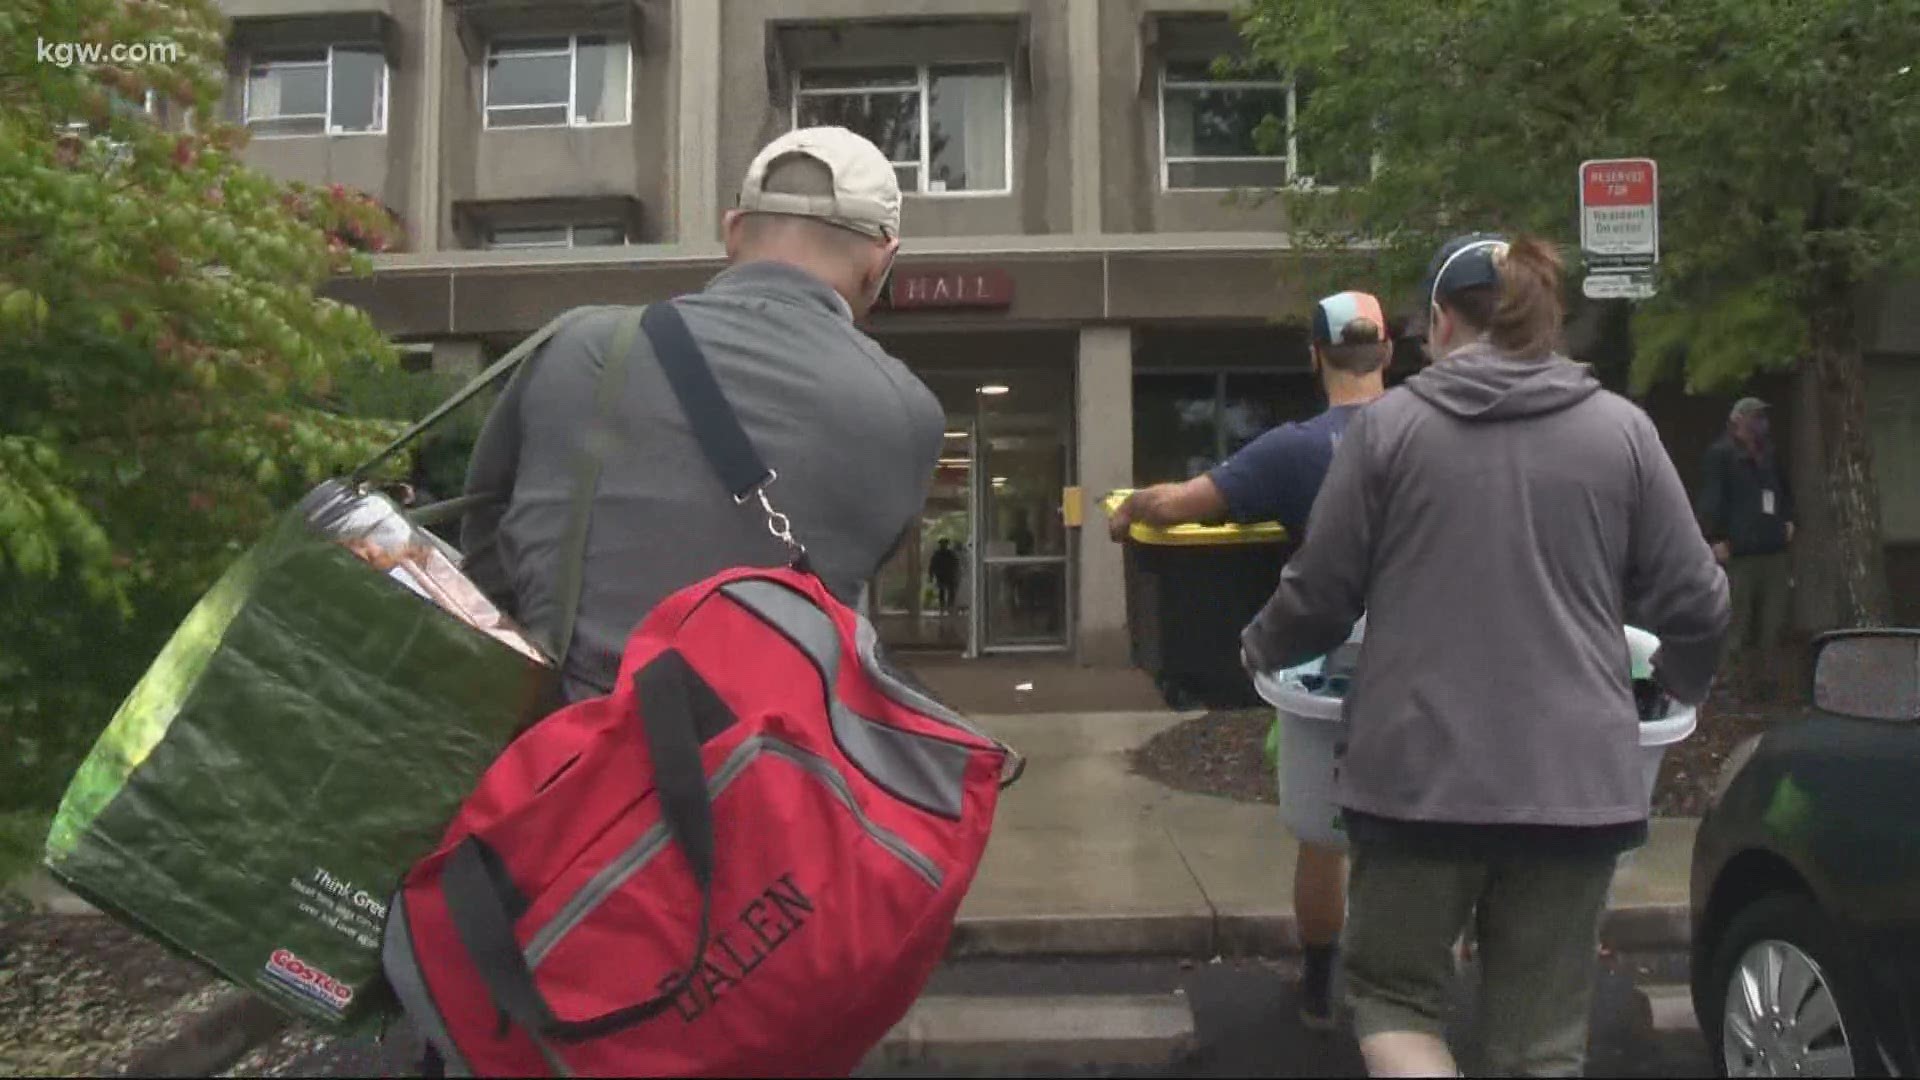 Move-in day has been spread out over the course of 5 days instead of a single day due to the pandemic.